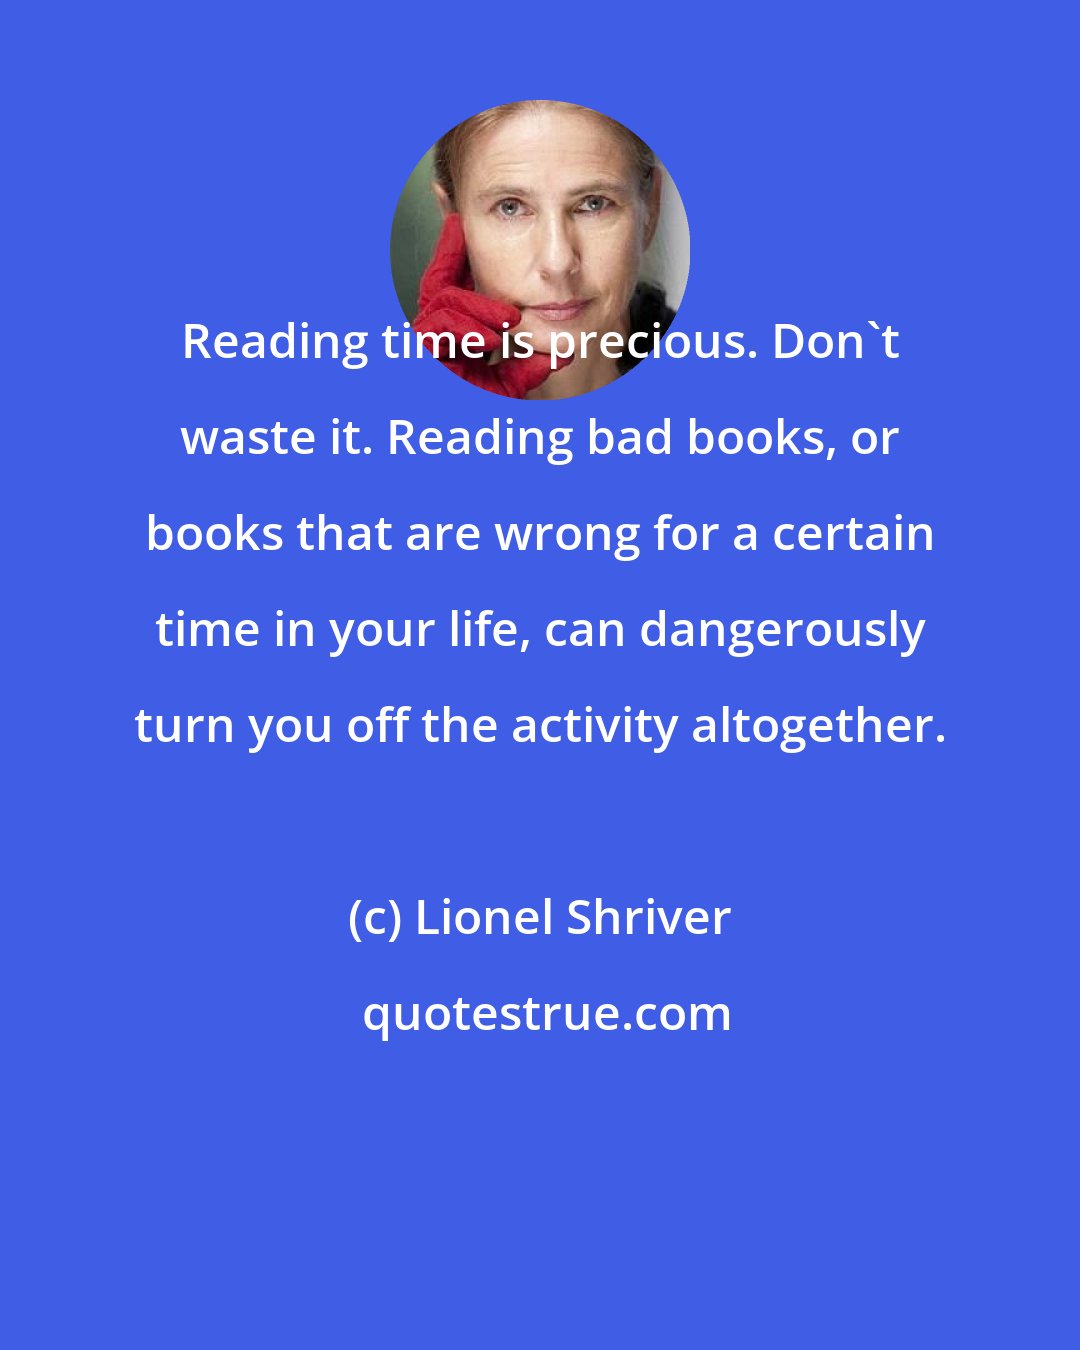 Lionel Shriver: Reading time is precious. Don't waste it. Reading bad books, or books that are wrong for a certain time in your life, can dangerously turn you off the activity altogether.